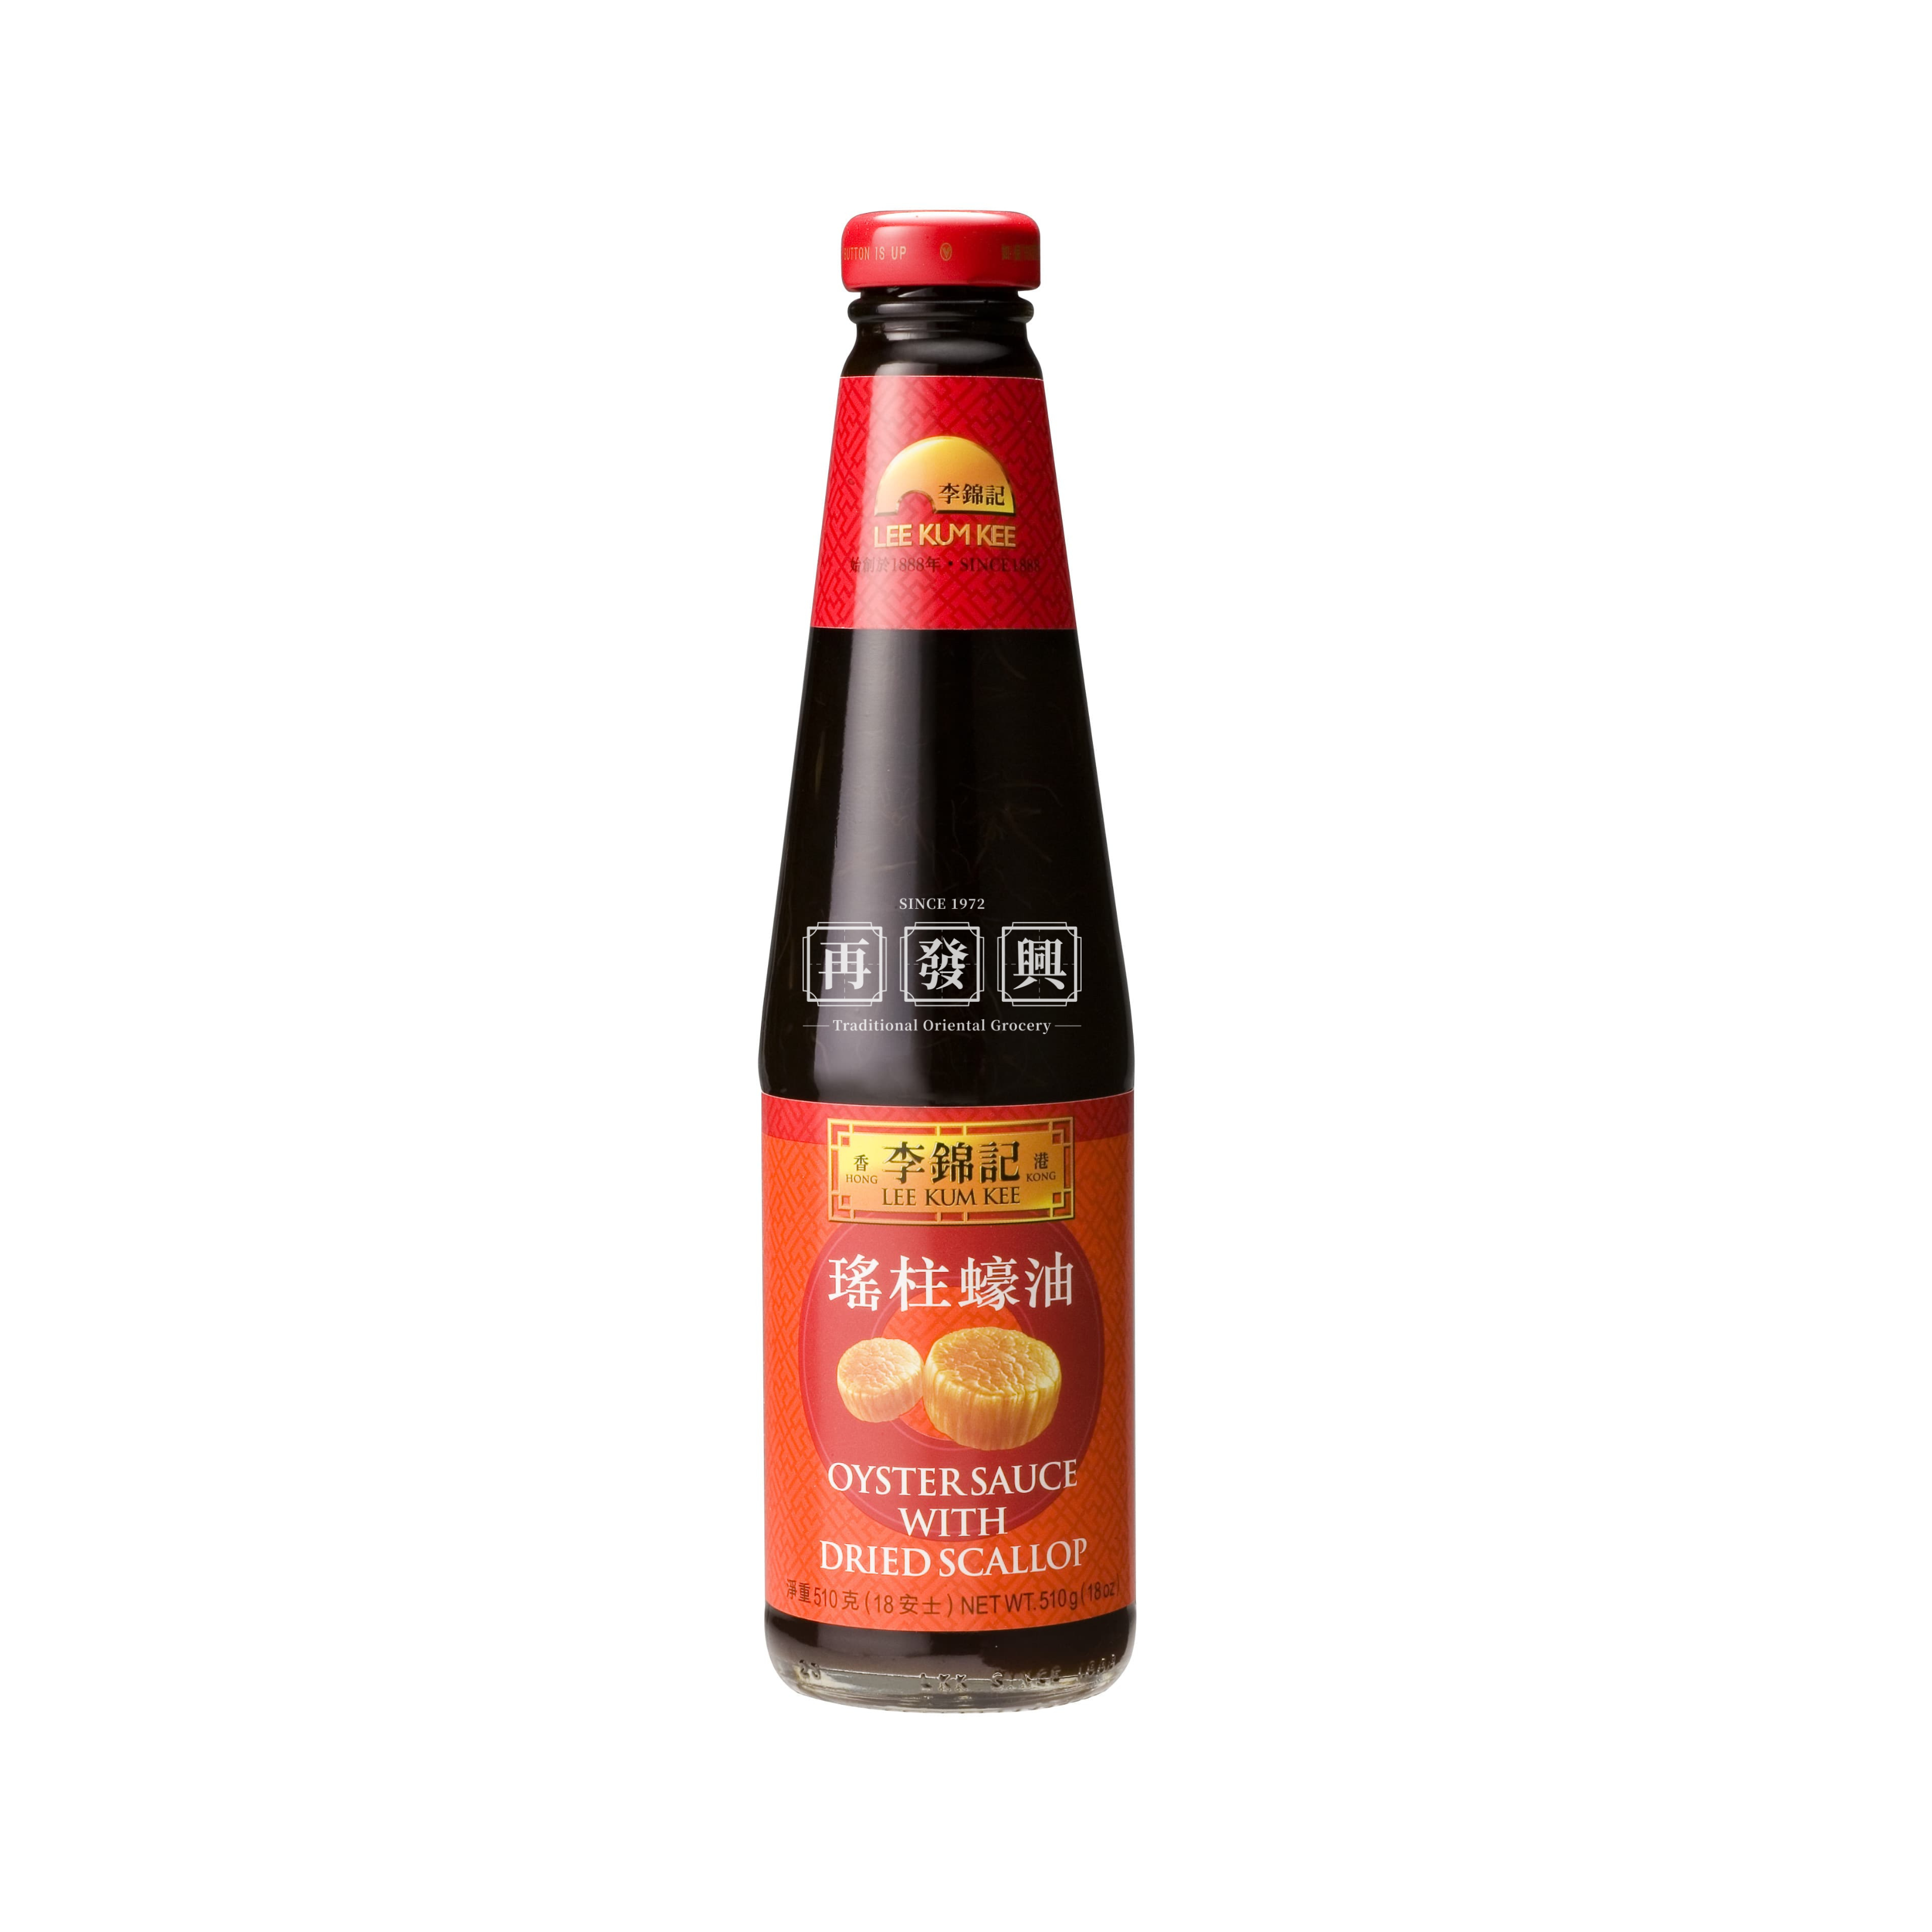 LKK Oyster Sauce with Dried Scallop 510g